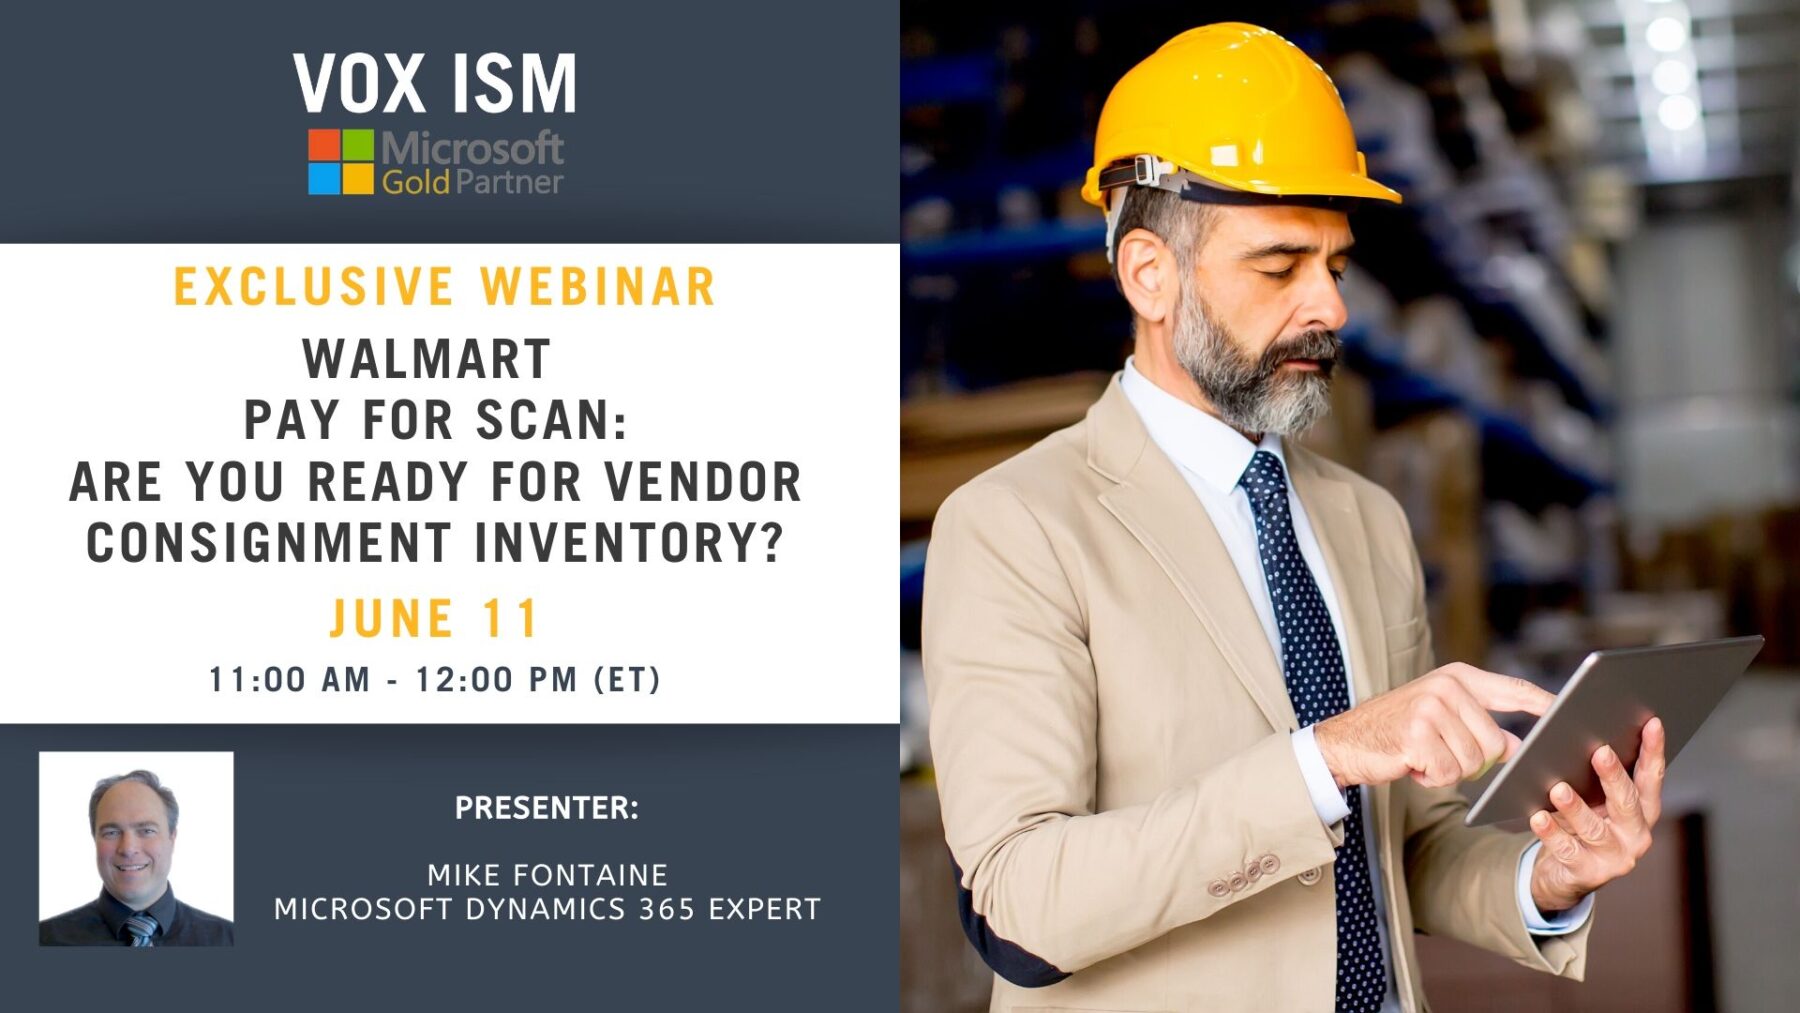 Walmart Pay for Scan - Are you ready for vendor consignment inventory? - June 11 - Webinar VOX ISM